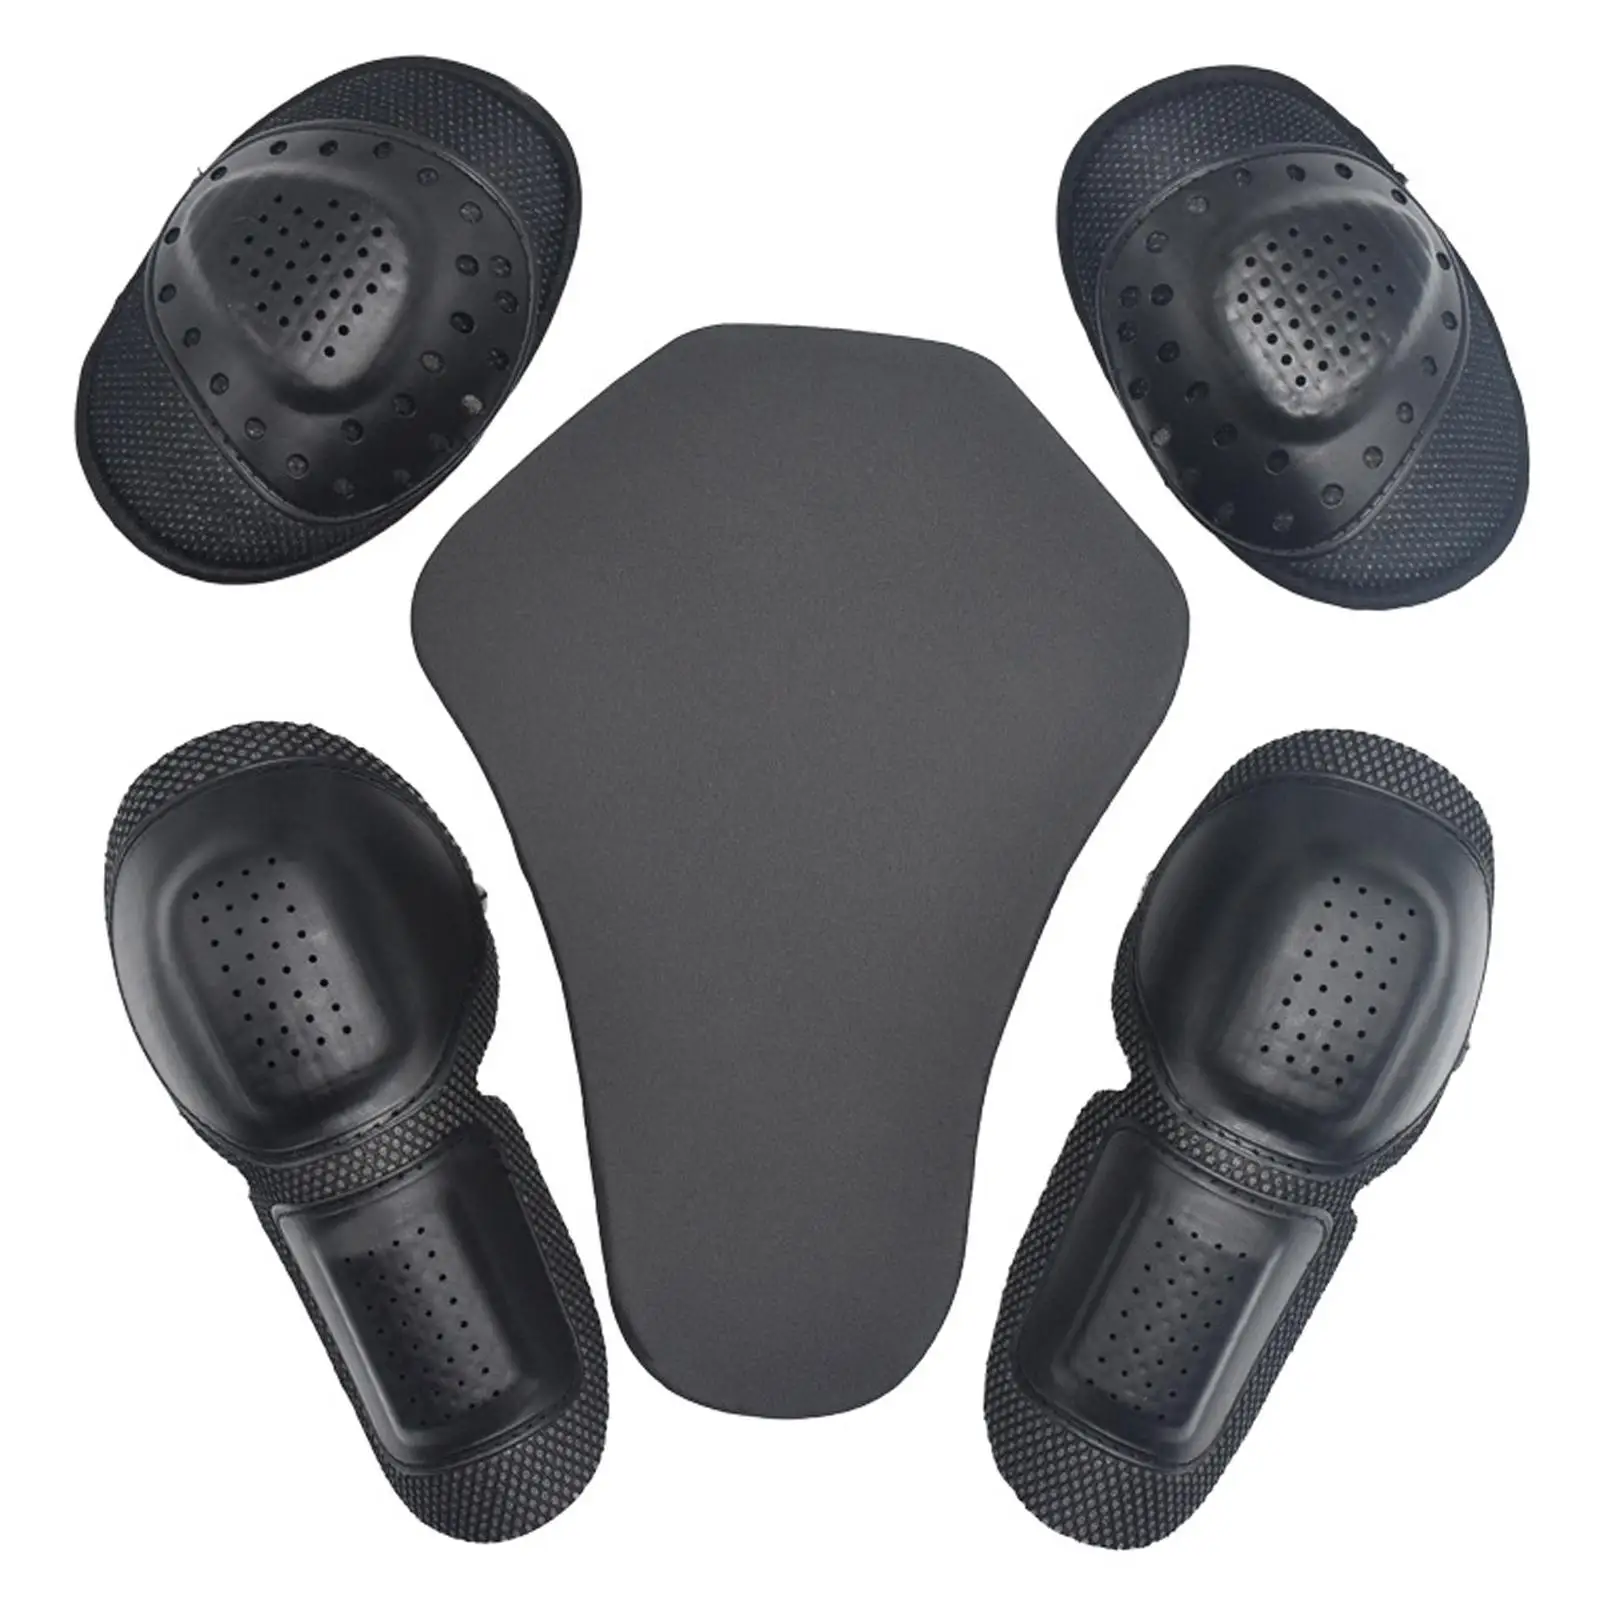 5x Riding Shoulder Protector, Motorcycle Accessories, Motorbike Protection,